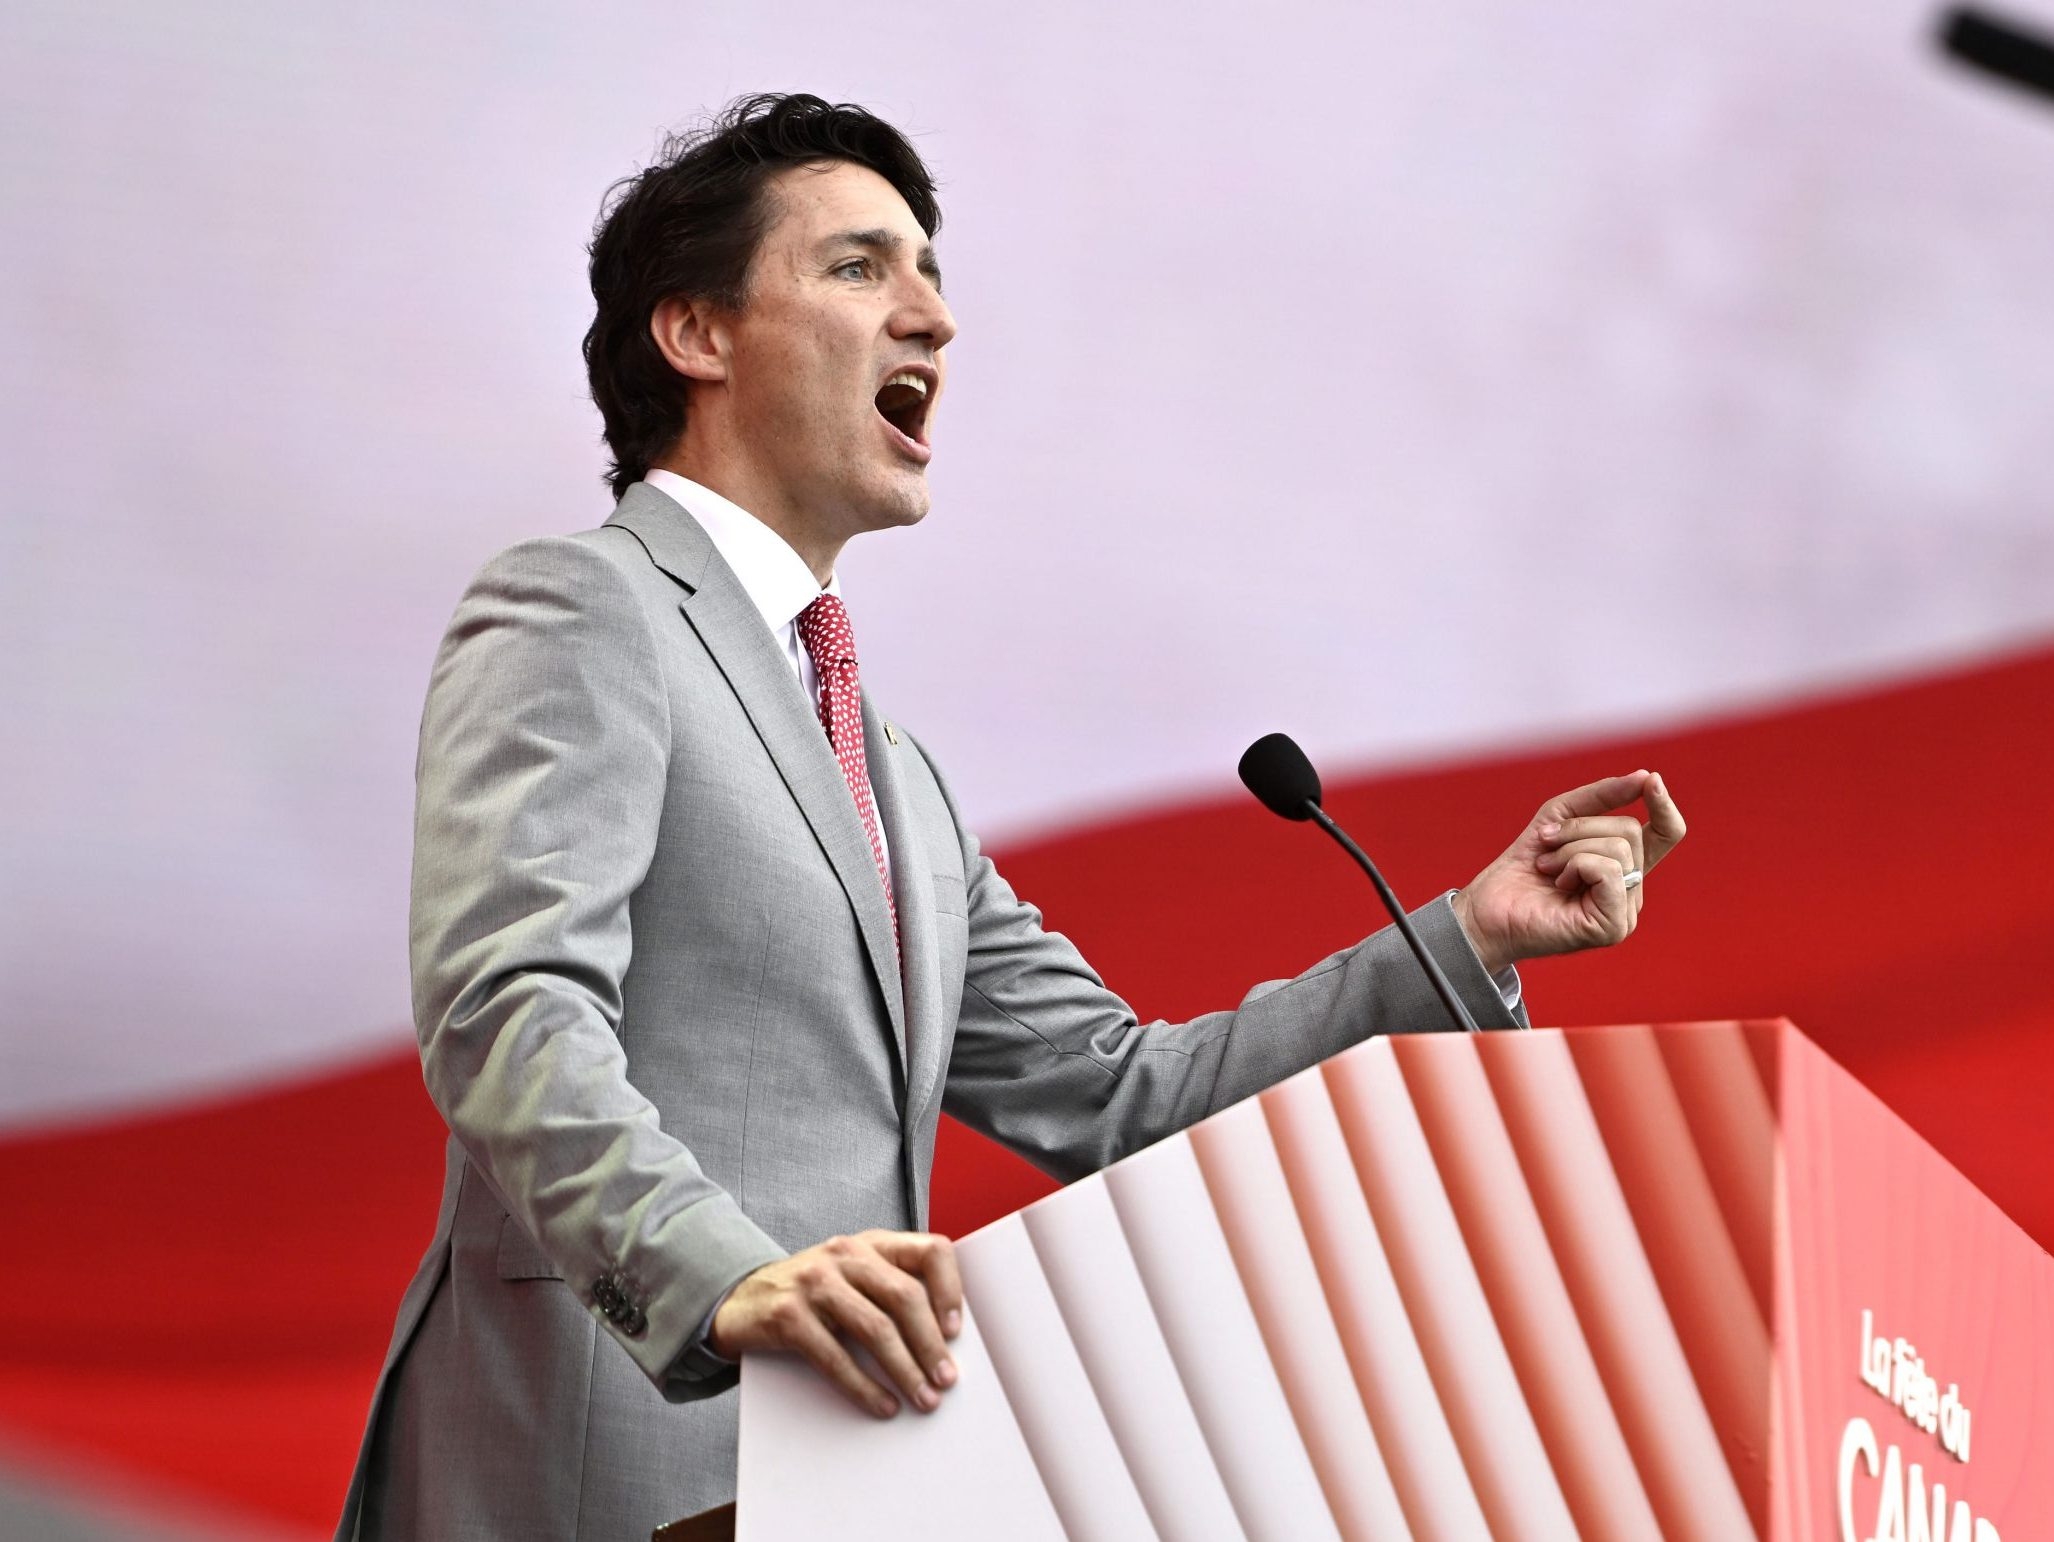 LILLEY UNLEASHED: Trudeau won't take the blame for airport mess